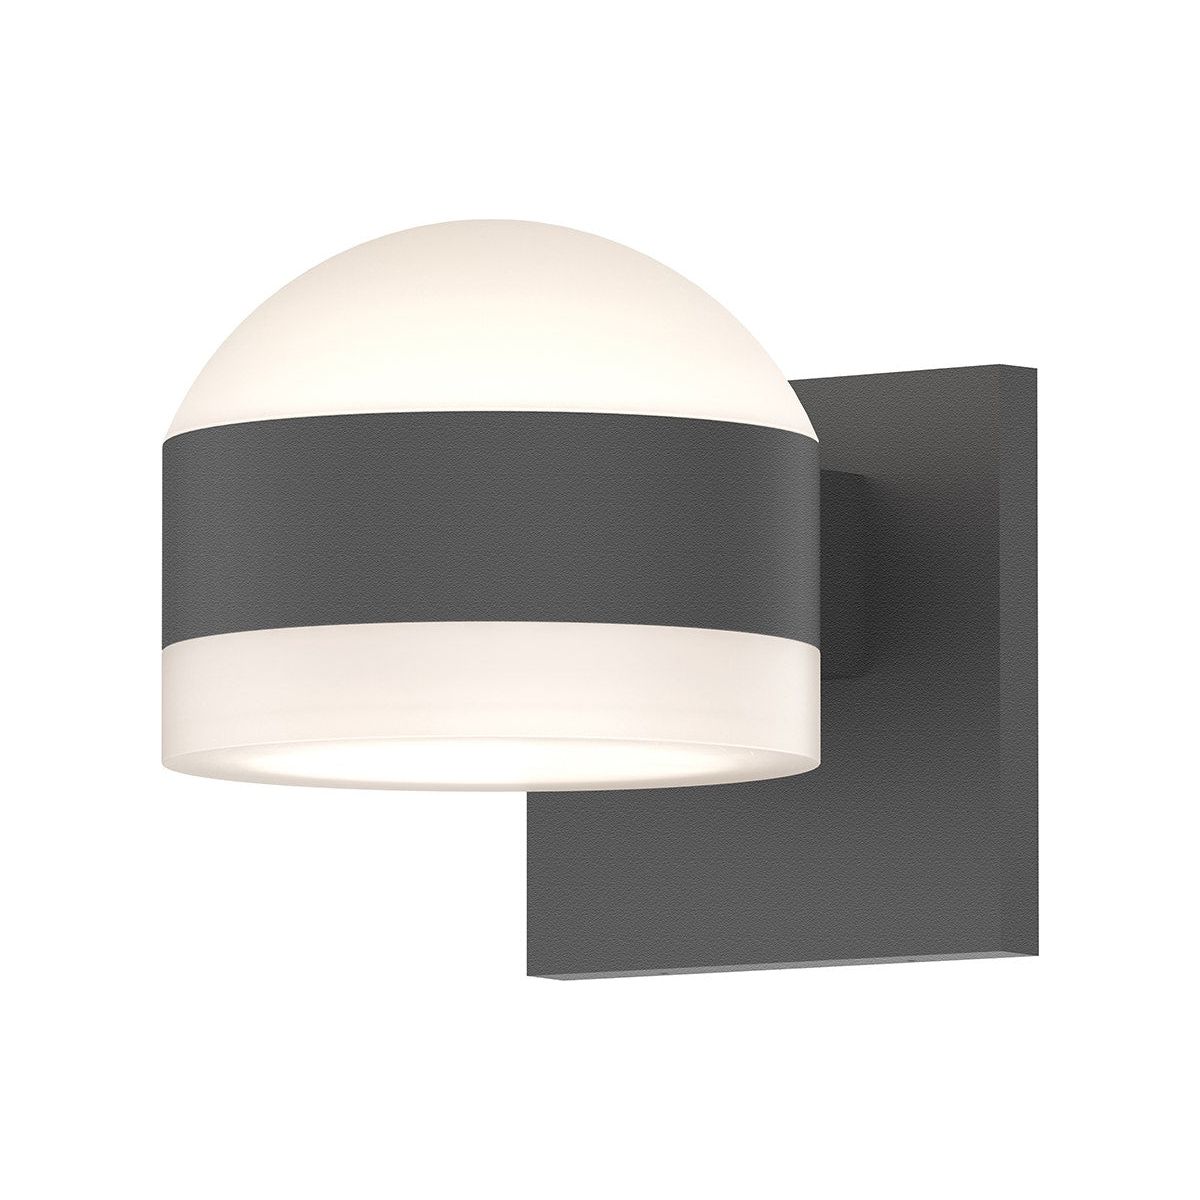 REALS Up/Down LED Sconce with Dome Top and Cylinder Bottom